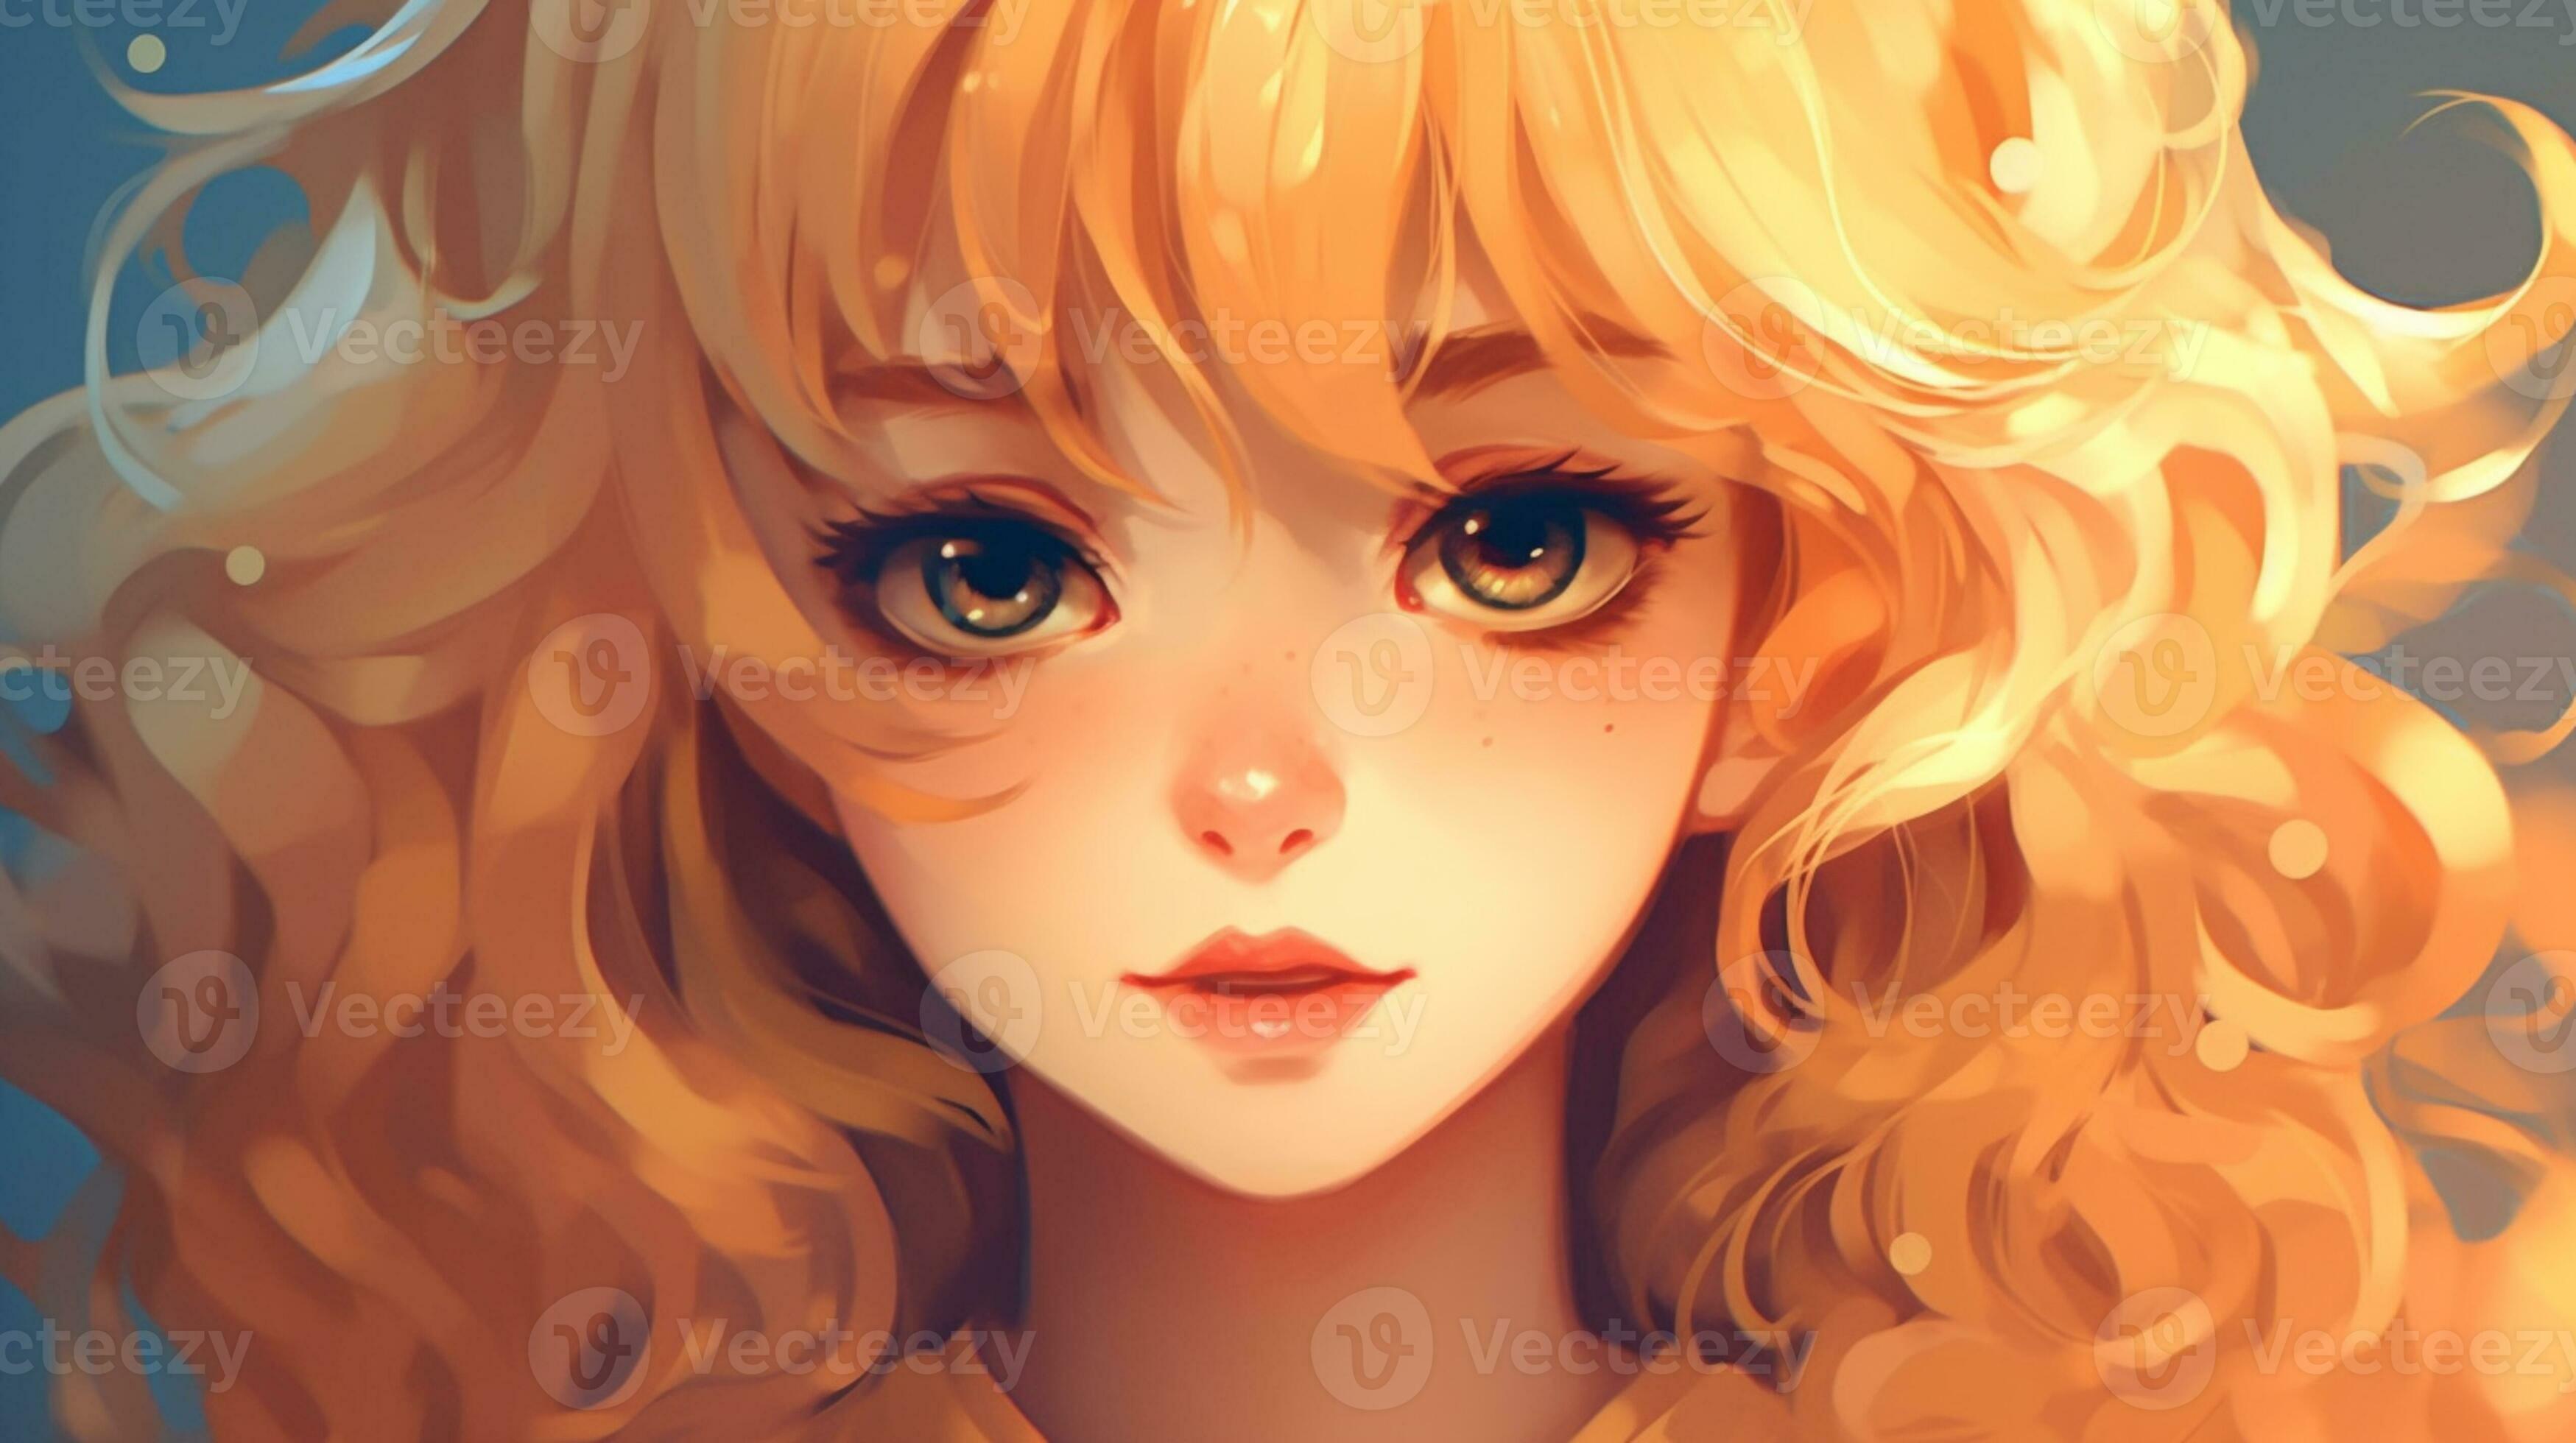 Are there any anime girls with blonde curly hair and blue eyes that I can  cosplay as? Preferably from a funny/realistic anime? - Quora